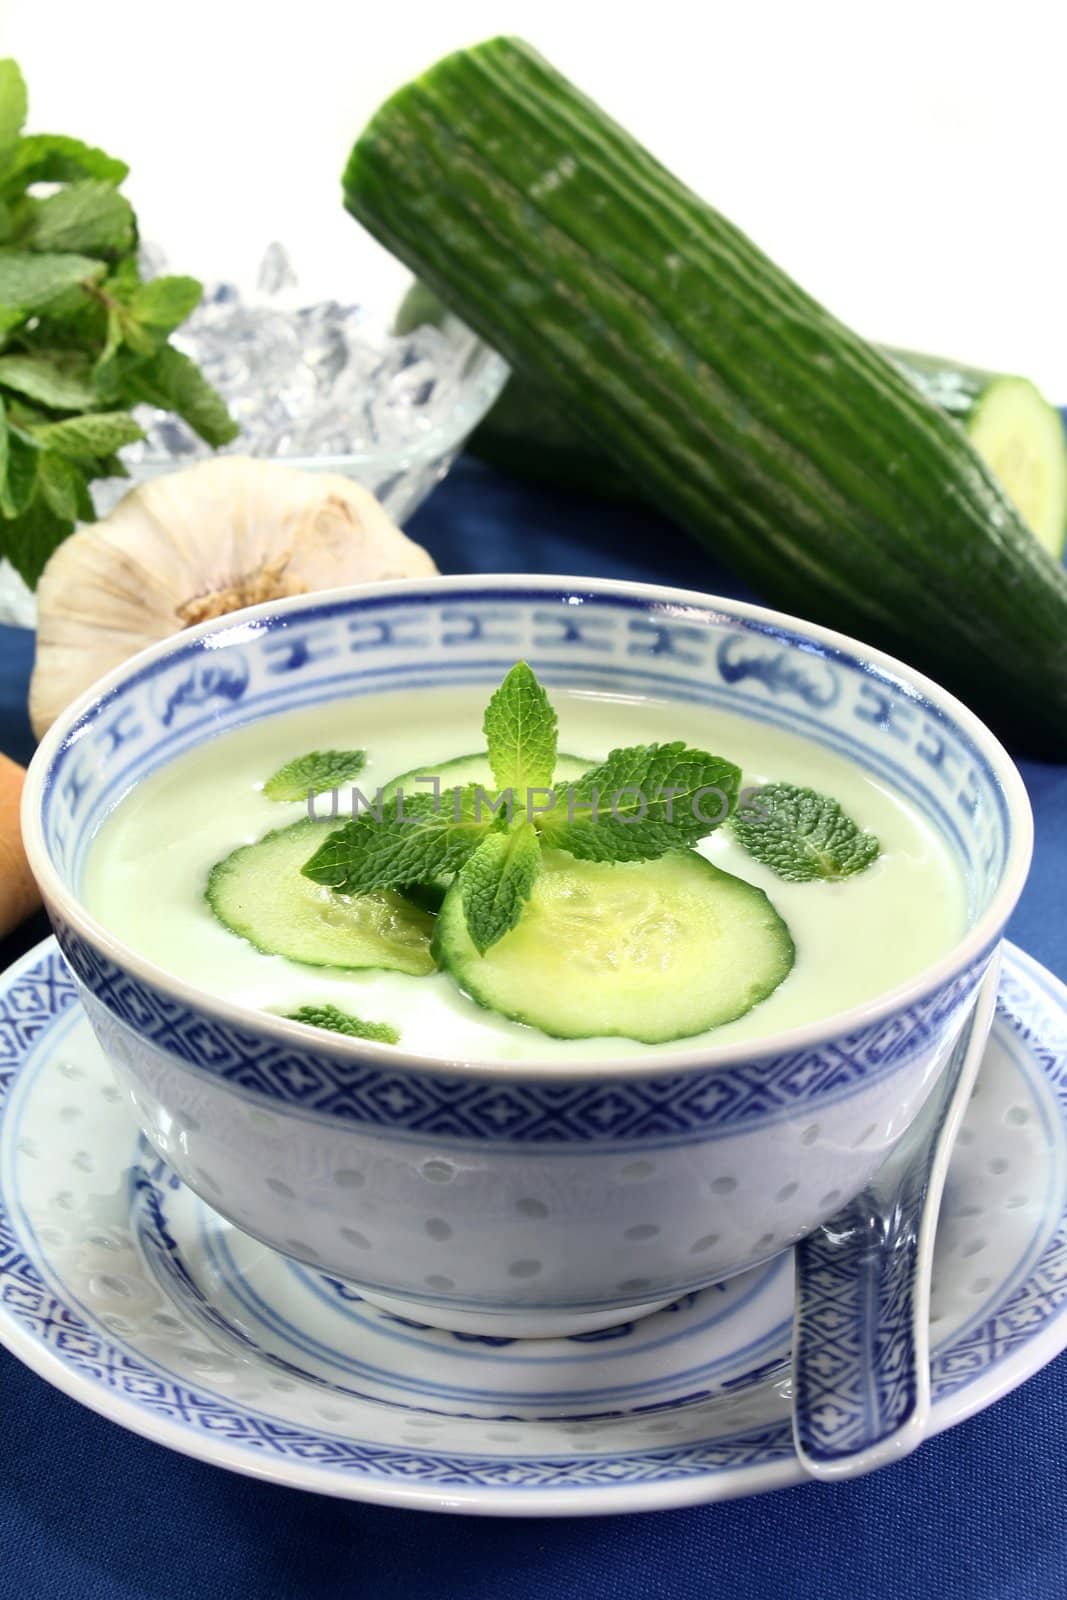 Cucumber soup by silencefoto